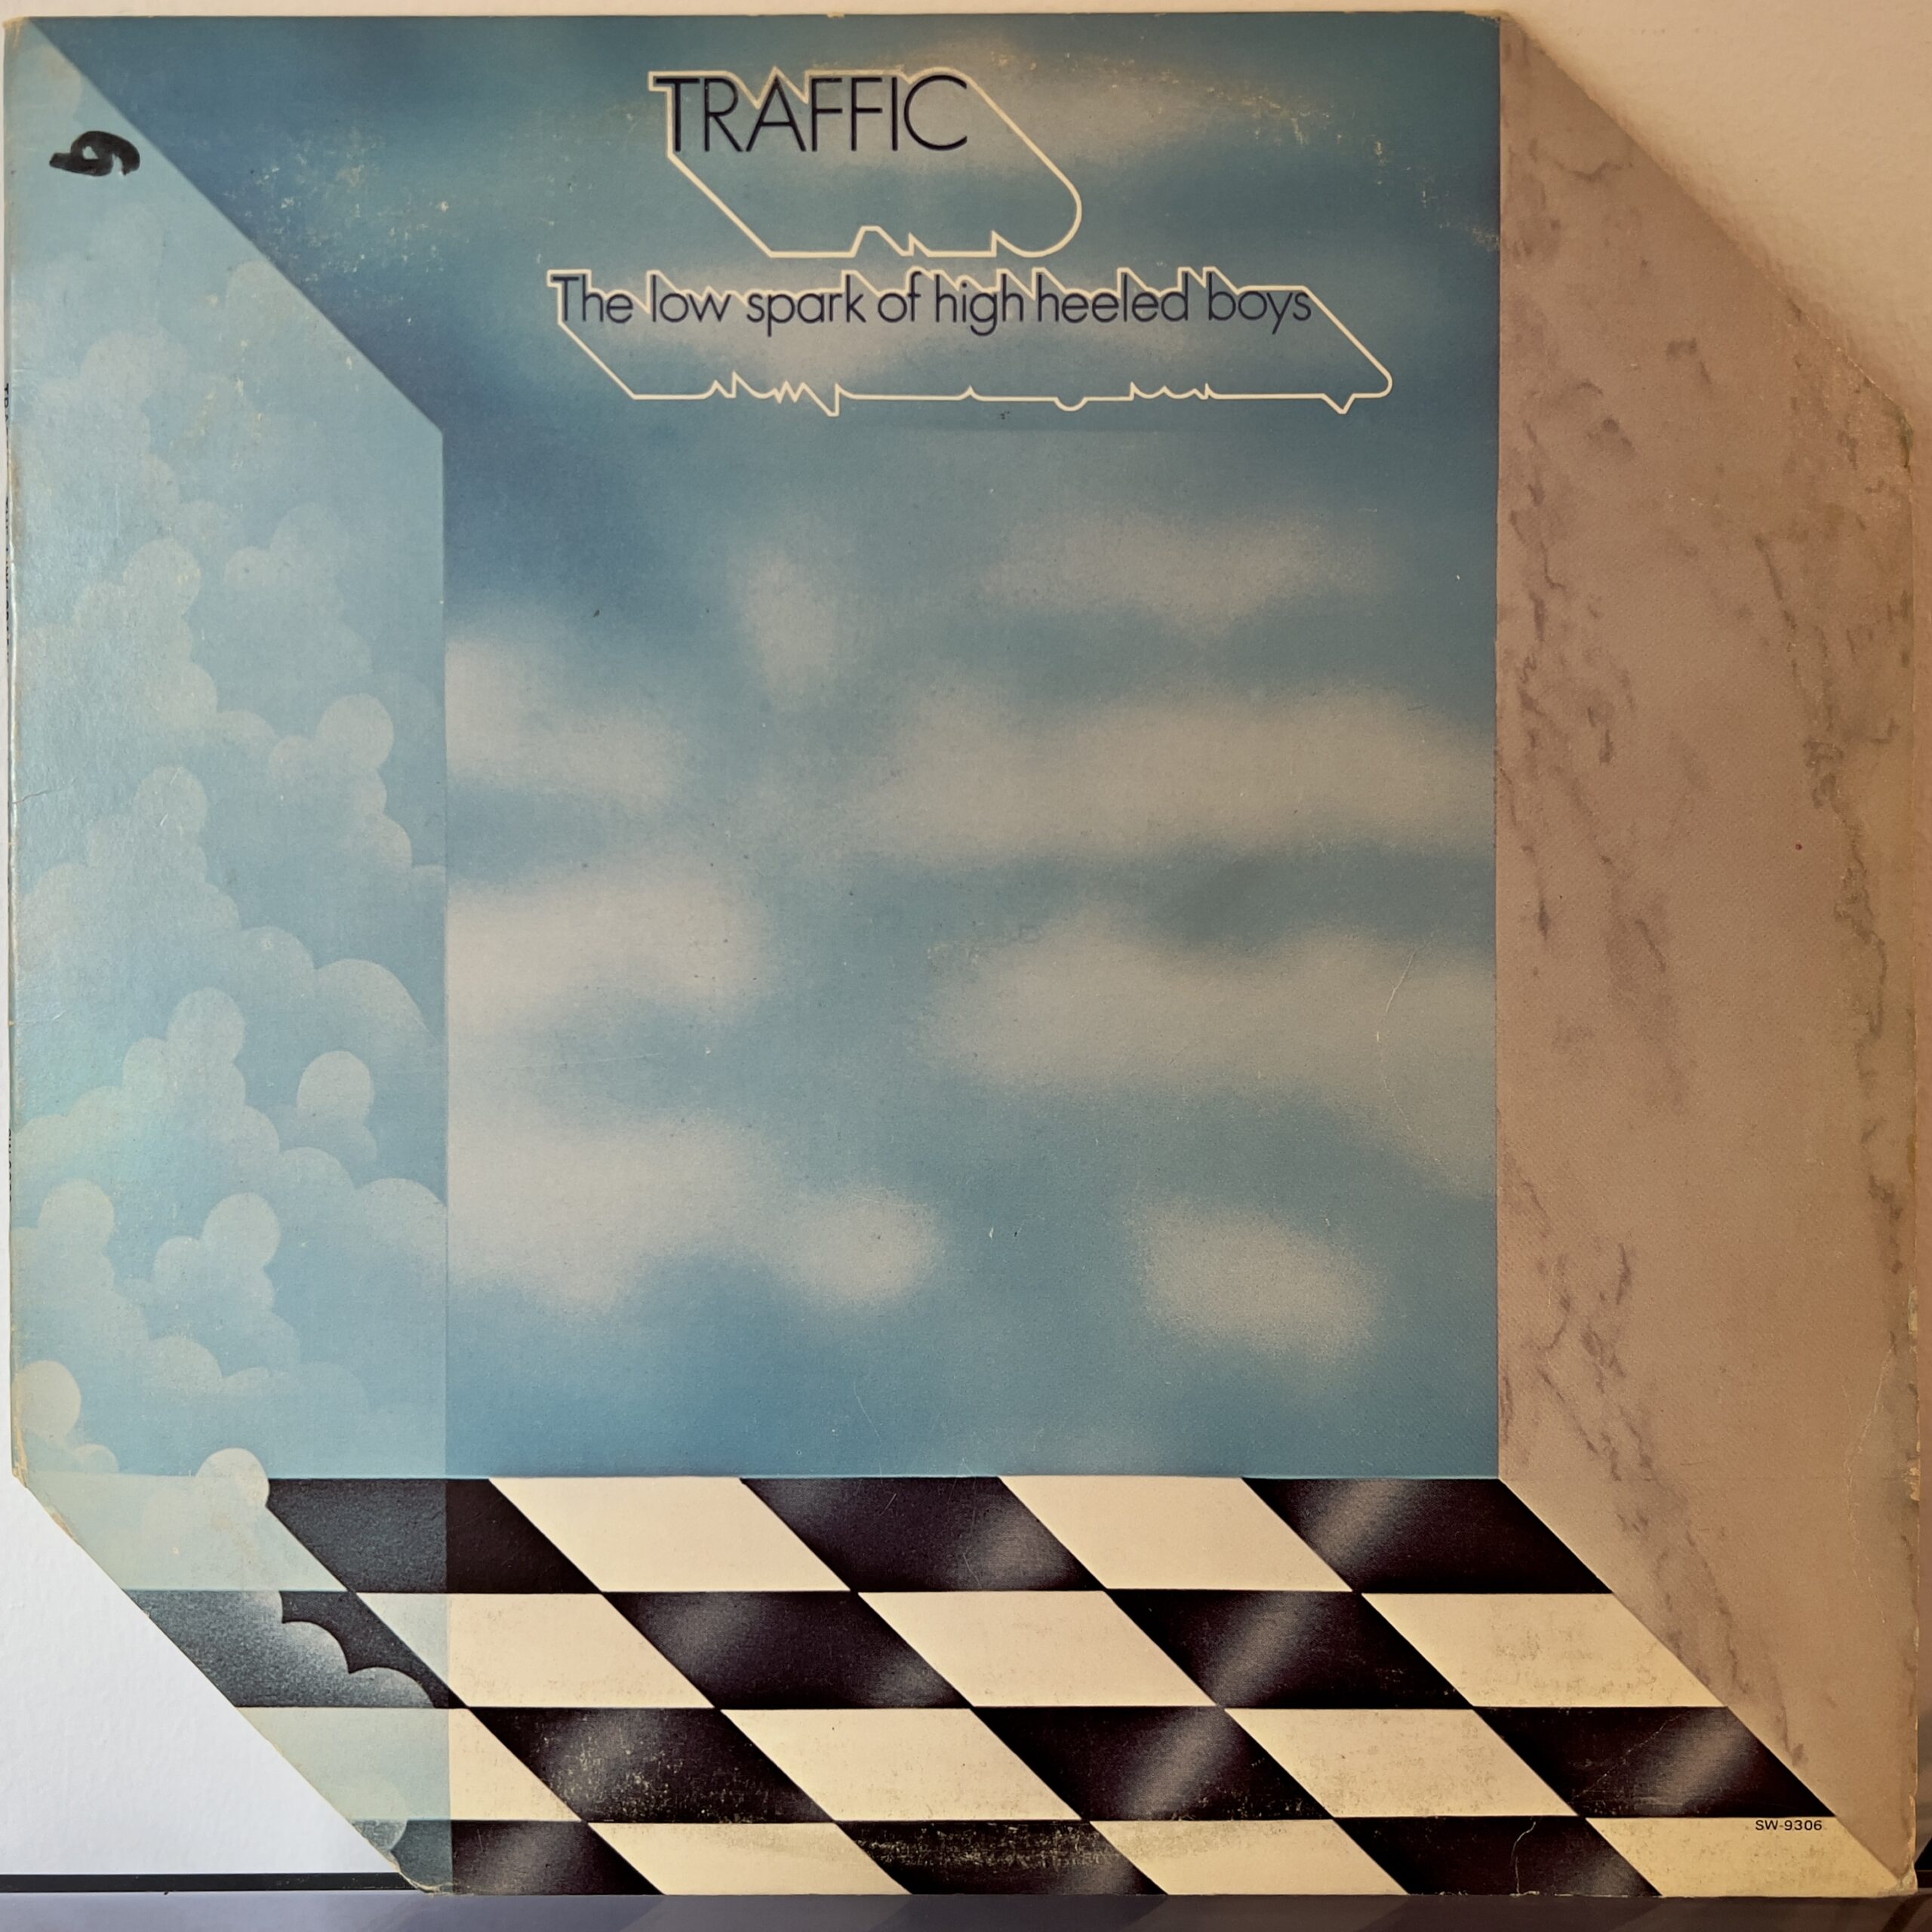 The low spark of high-heeled boys by Traffic